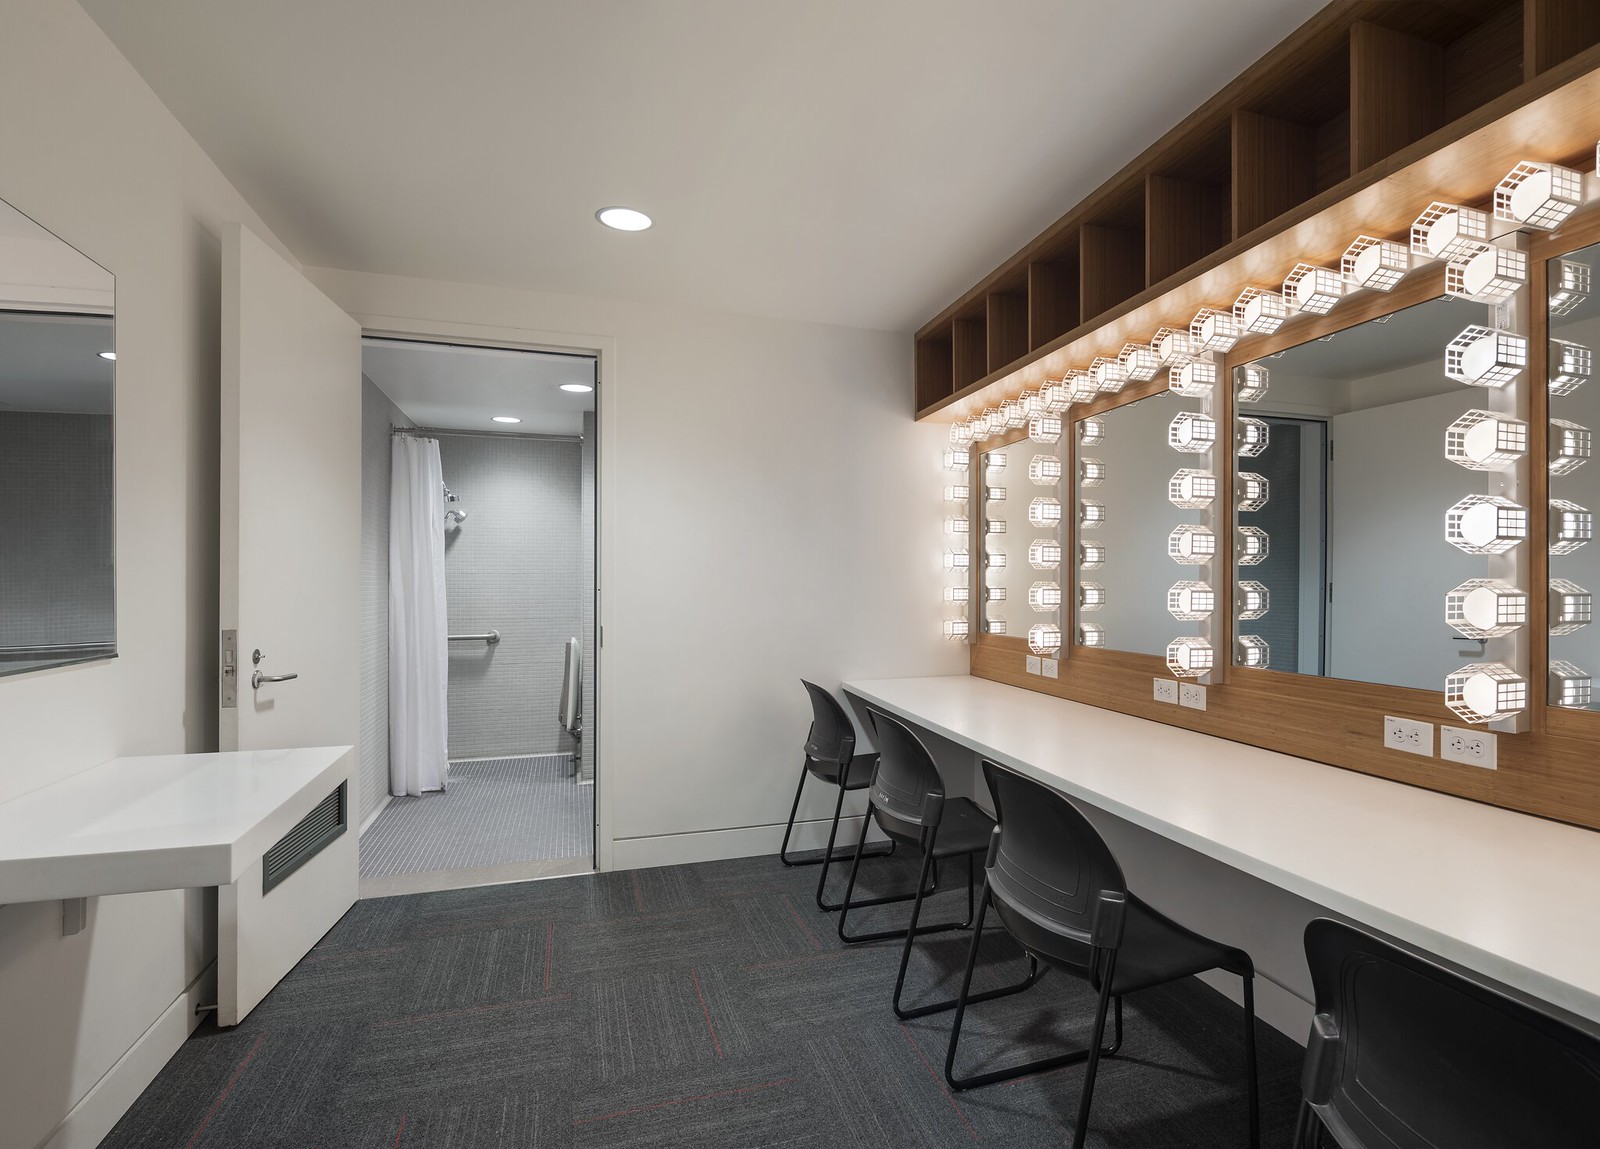 One of the Mezzanine Theatre dressing rooms, complete with dimmable mirror lights and a bathroom.